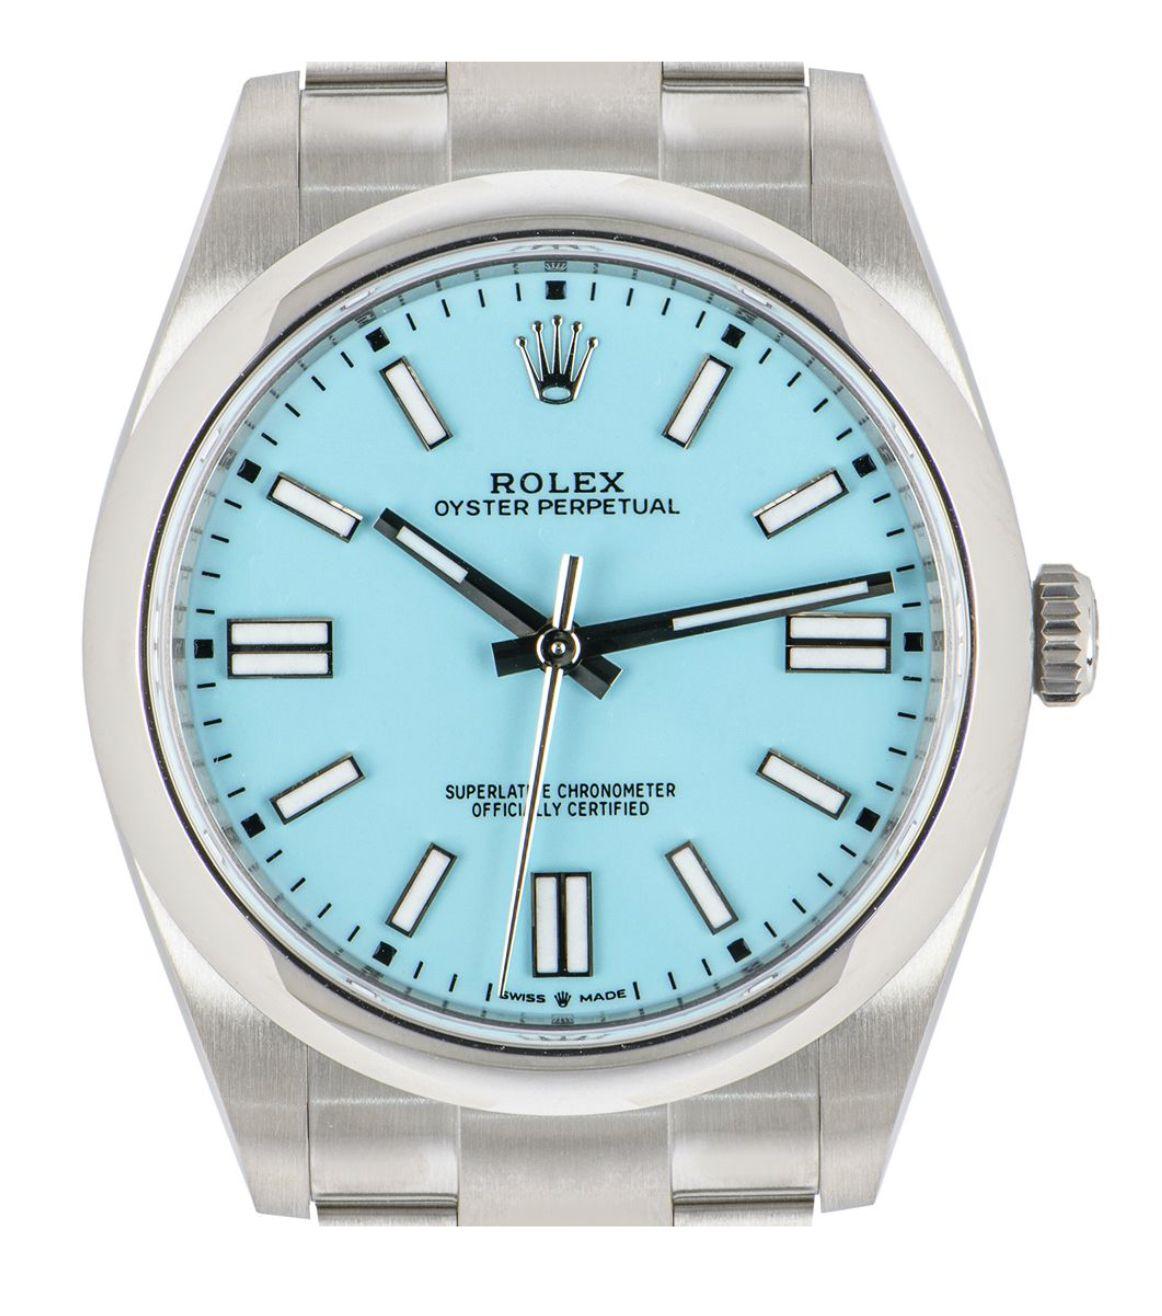 An unworn 41mm Oyster Perpetual in Oystersteel, by Rolex. Featuring a smooth domed bezel and a turquoise blue dial; reminiscent of Tiffany & Co.'s blue. The Oyster bracelet comes with a folding Oysterclasp, which is equipped with the Easylink 5mm